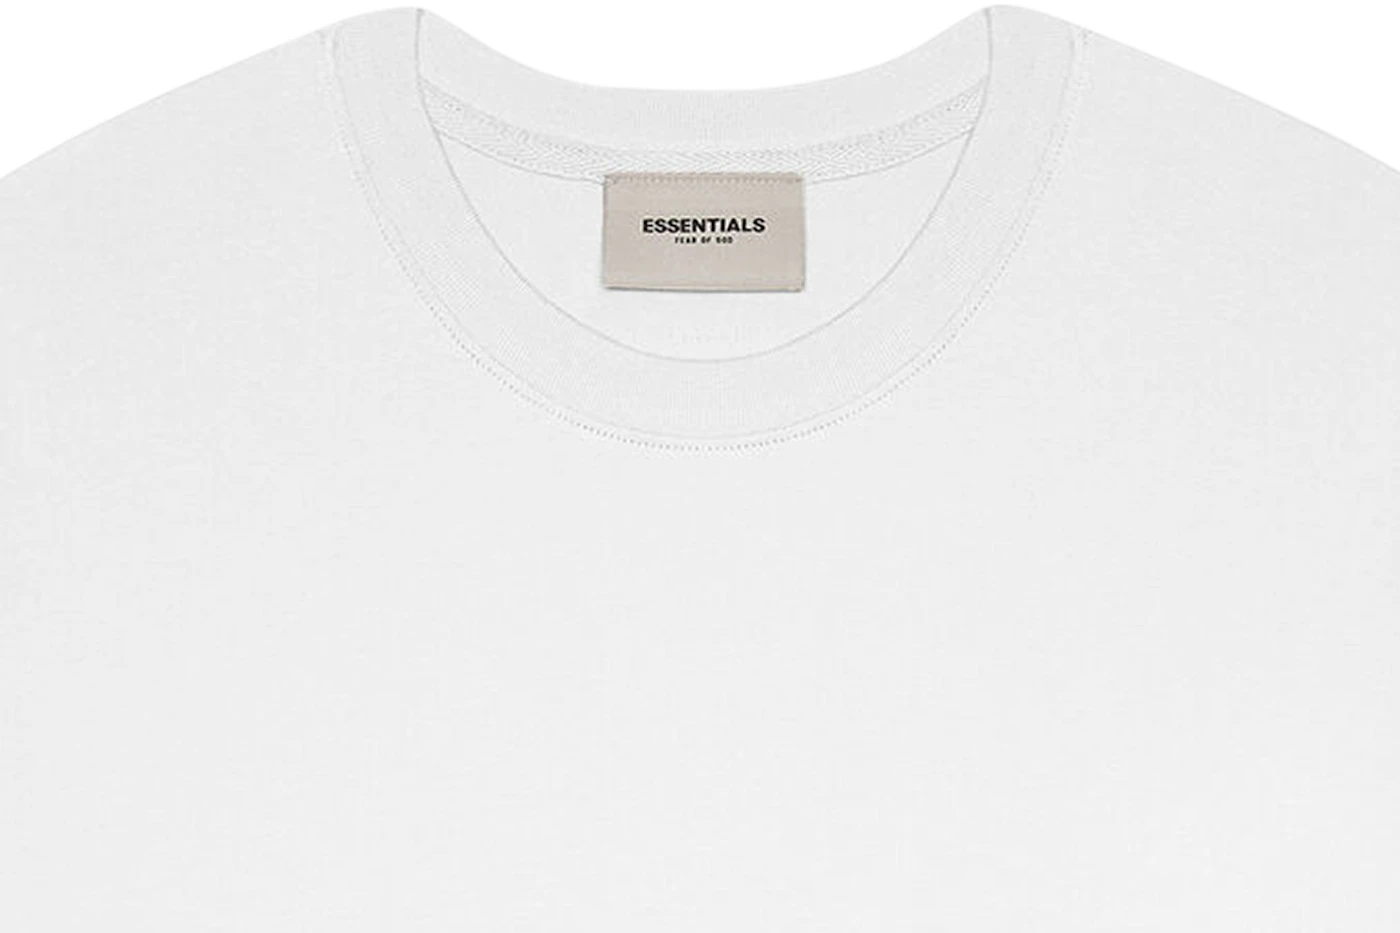 Fear of God Essentials 3D Silicon Applique Boxy T-Shirt White - SS20 - US